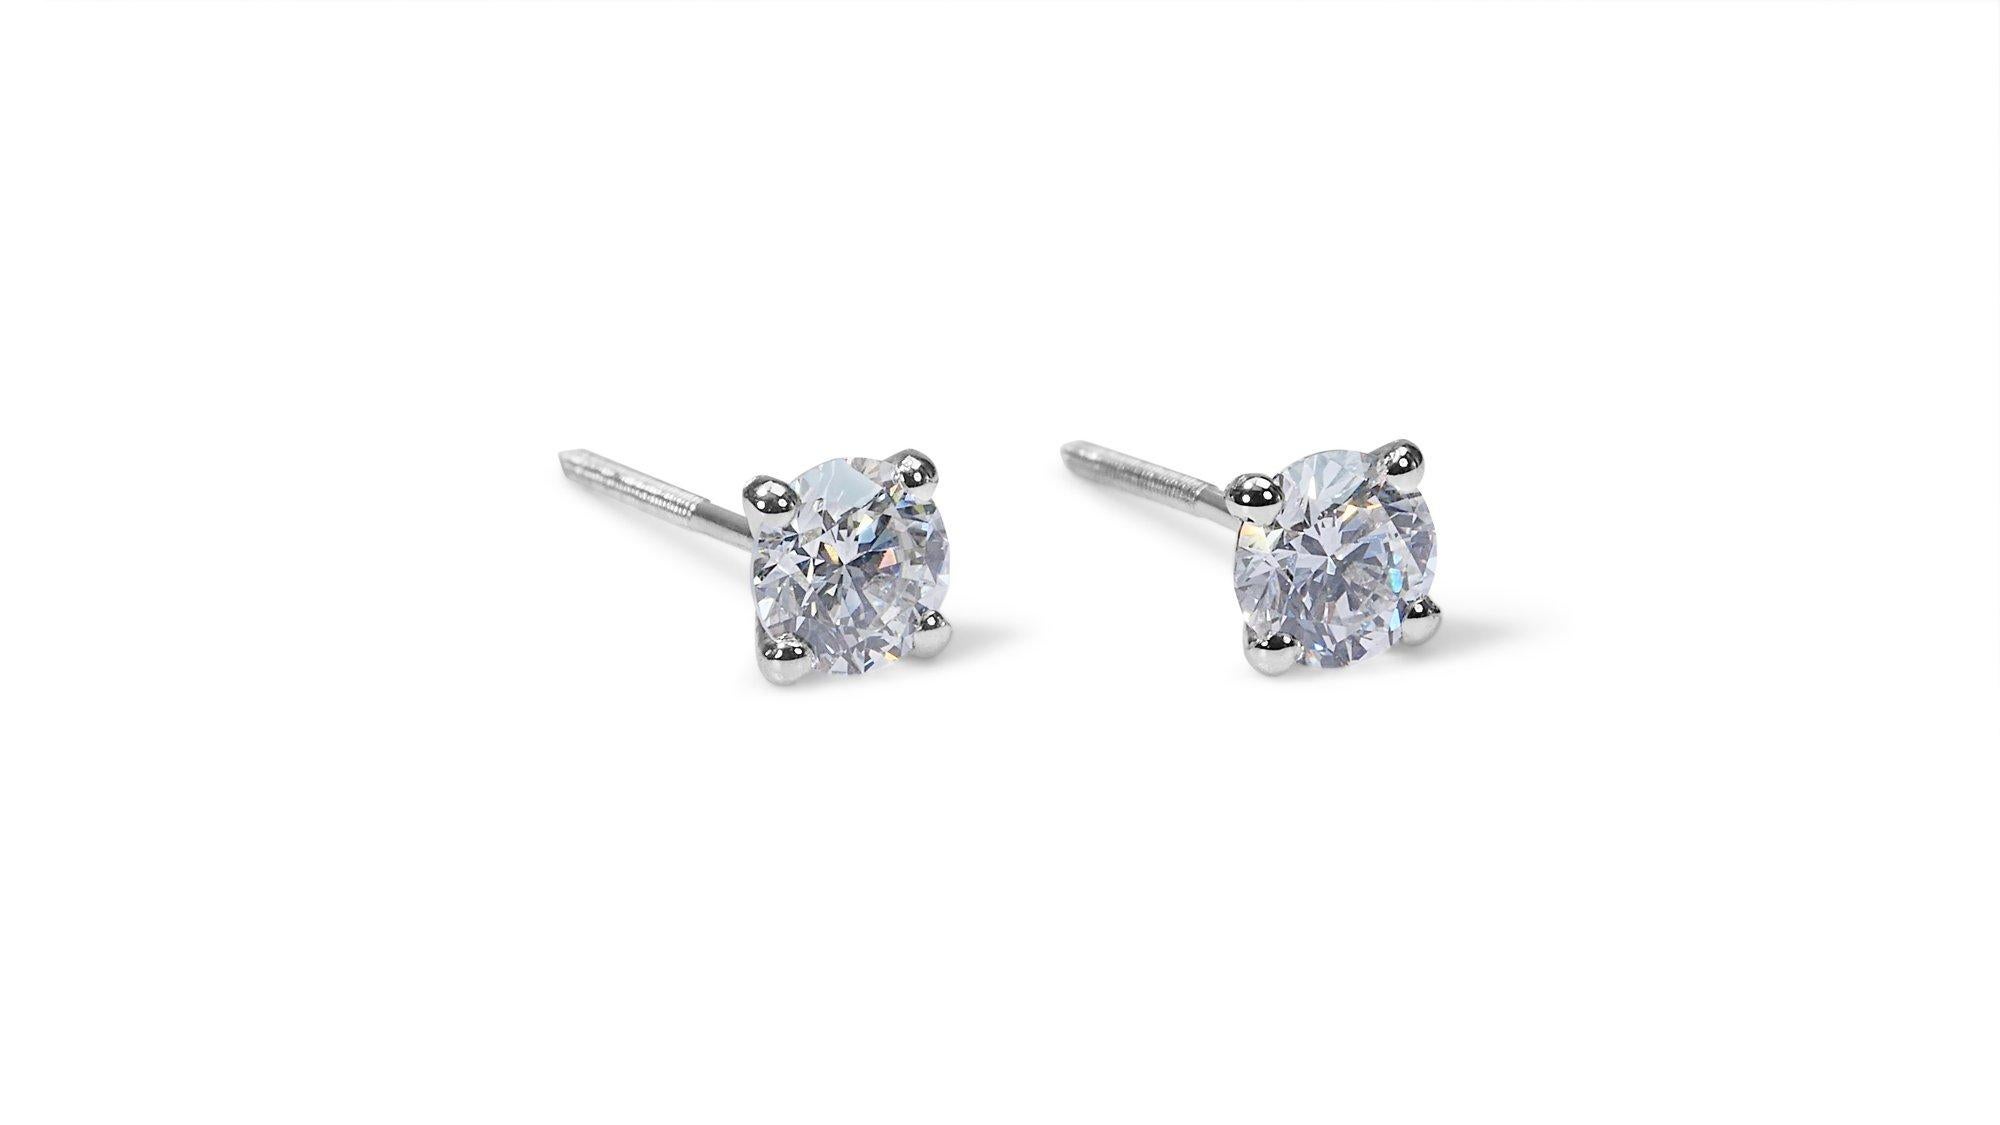 Round Cut Exquisite 1.42ct Round Diamond Stud Earrings in 18k White Gold - GIA Certified For Sale